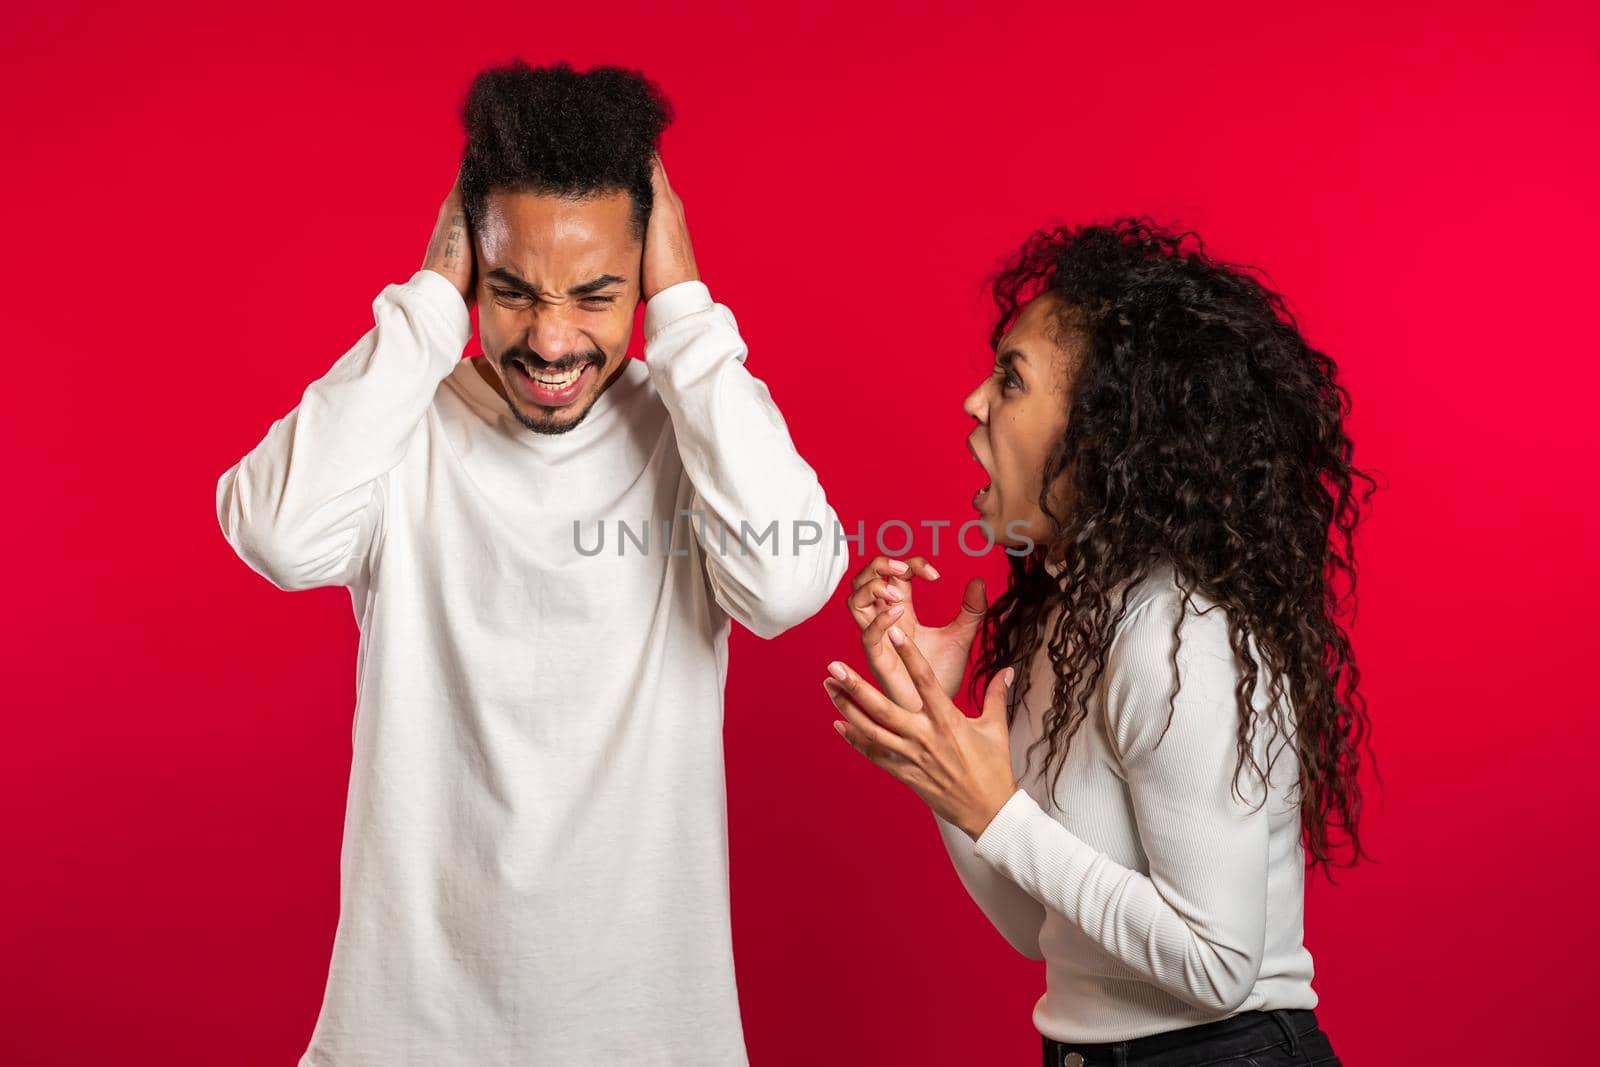 Young african woman emotionally screaming at her husband or boyfriend on red background in studio. Bored man covers ears with hands. Concept of conflict, problems in relationships